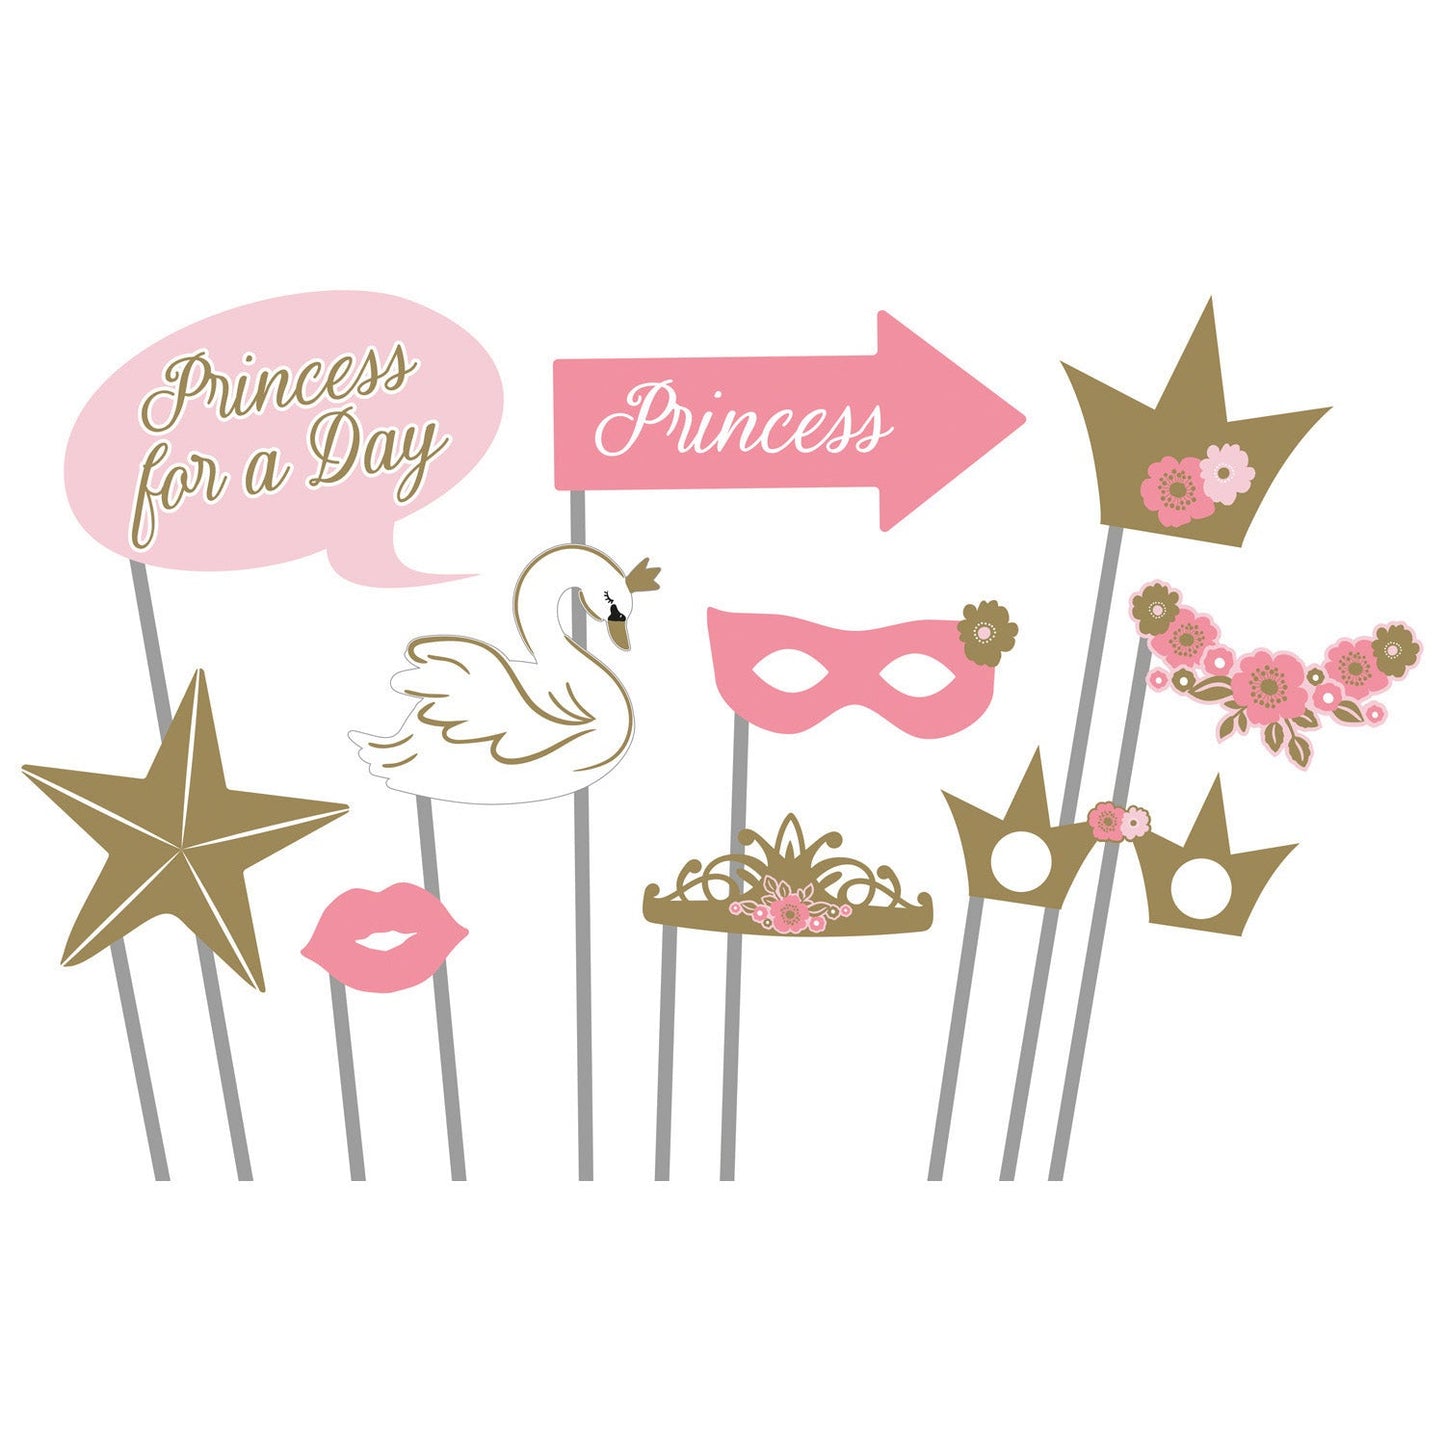 Princess for a Day Photo Booth Kit